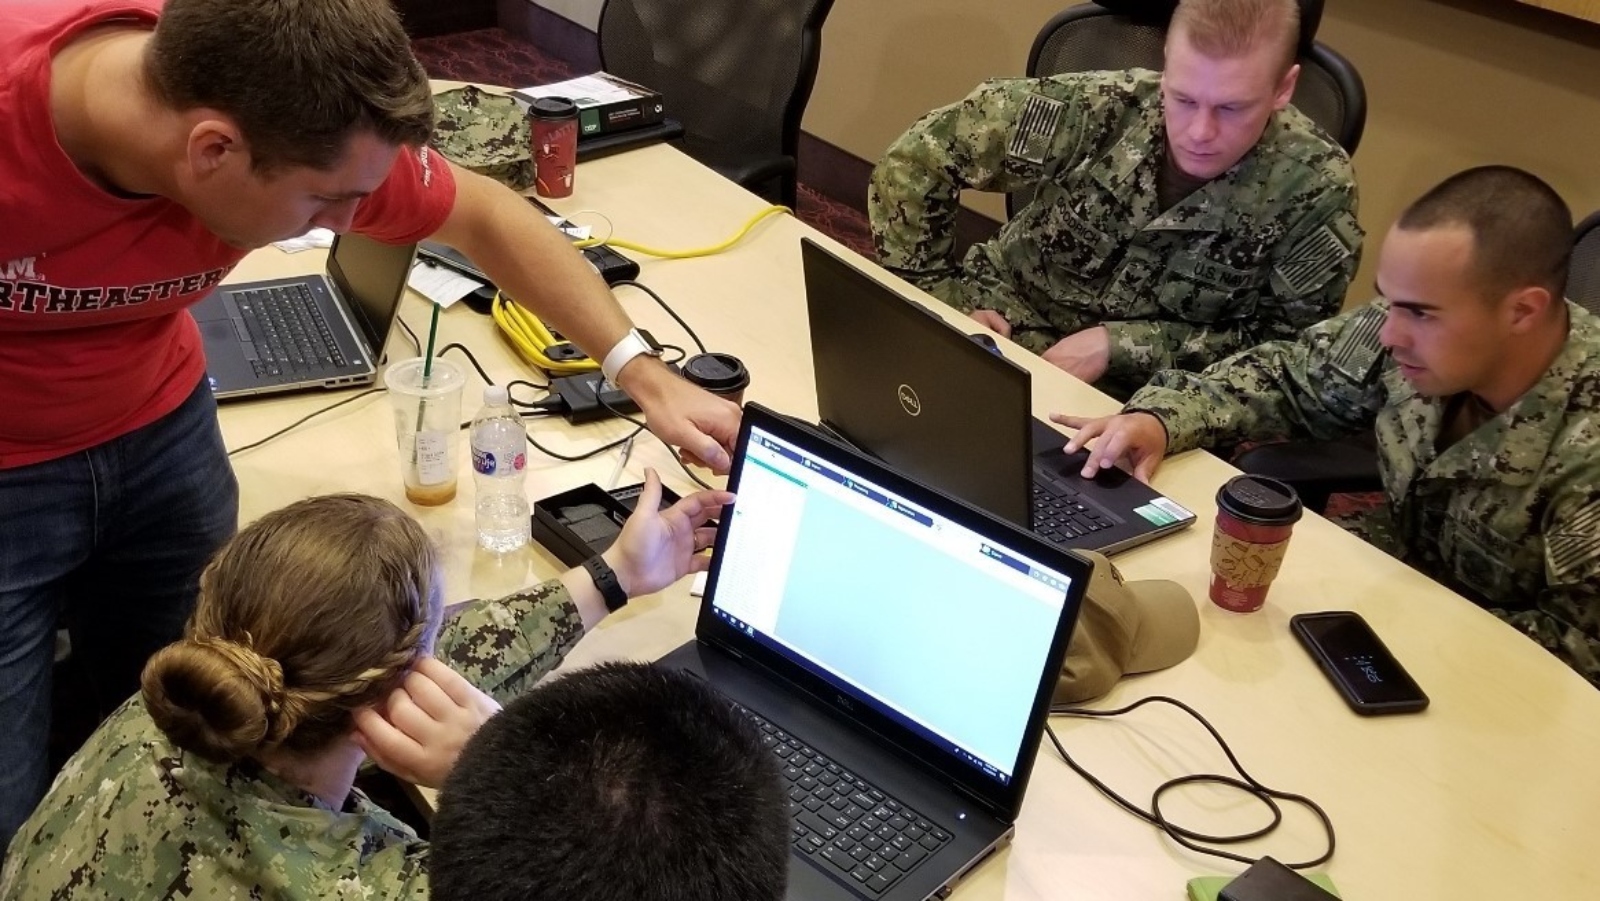 Sailors from the US Navy’s Space and Naval Warfare Systems Command Reserve Program Configuration Validation Team working with the Naval Information Warfare Center Pacific's RESTORE Lab in Bremerton, Washington, April 2019. Photo by Cmdr. John P Fagan/US Navy